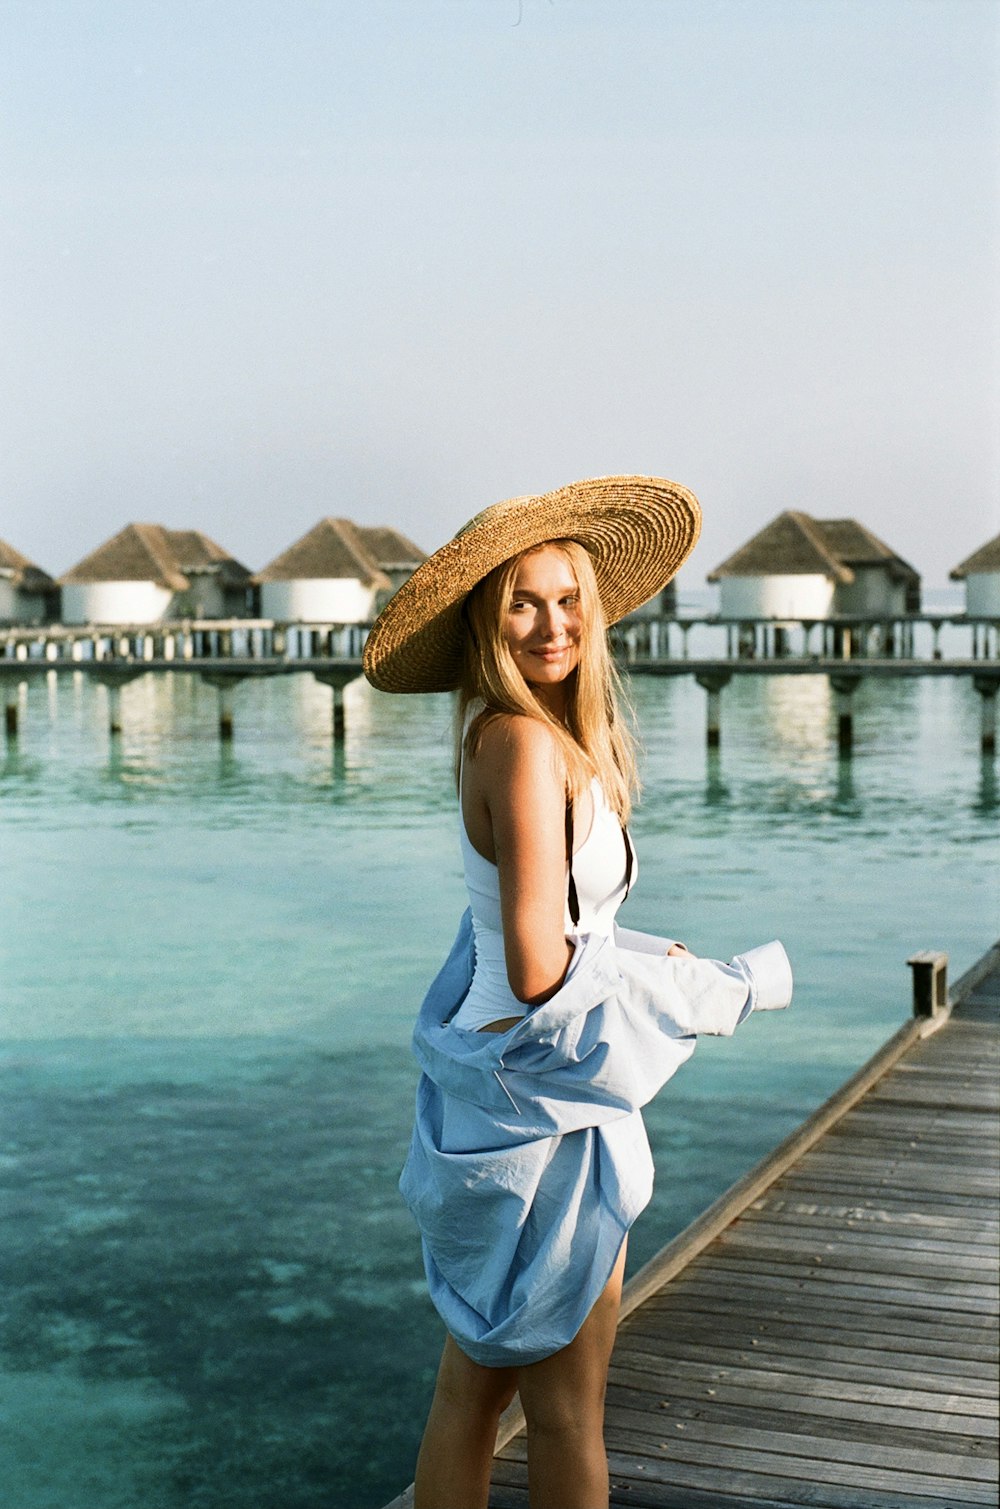 woman in white dress and brown straw hat sitting on wooden dock during daytime